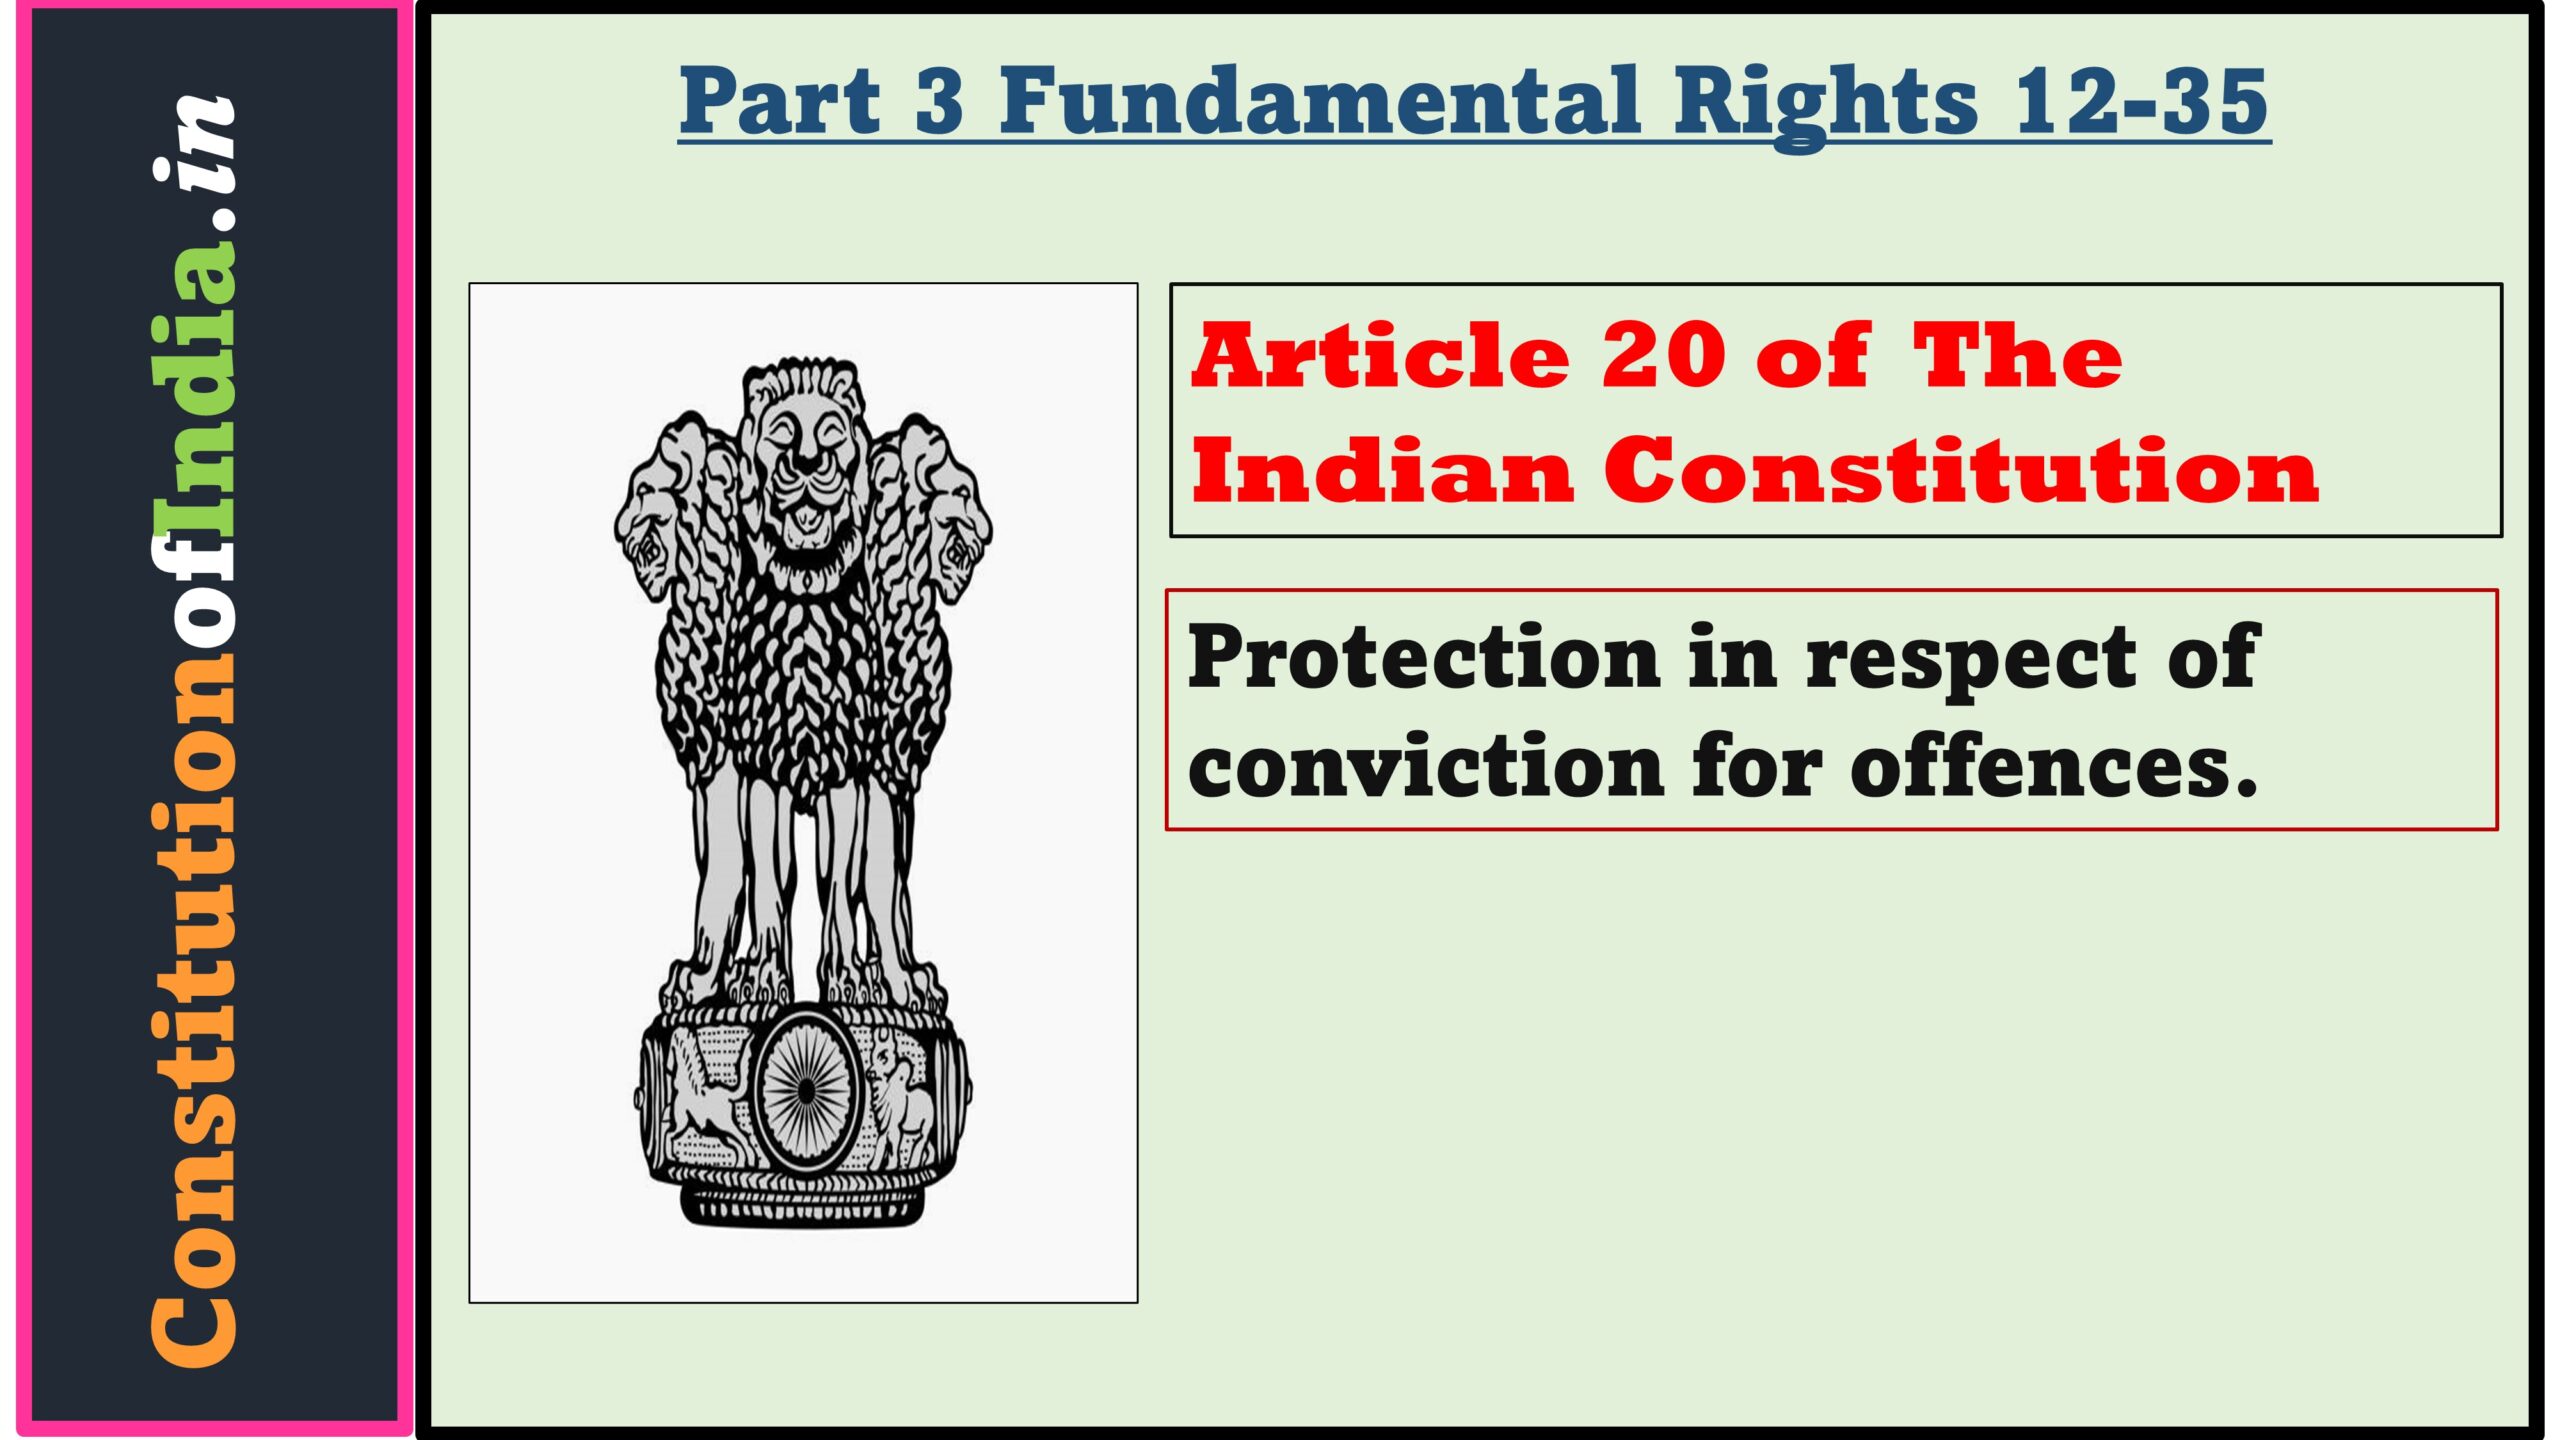 Article 20 of Indian Constitution